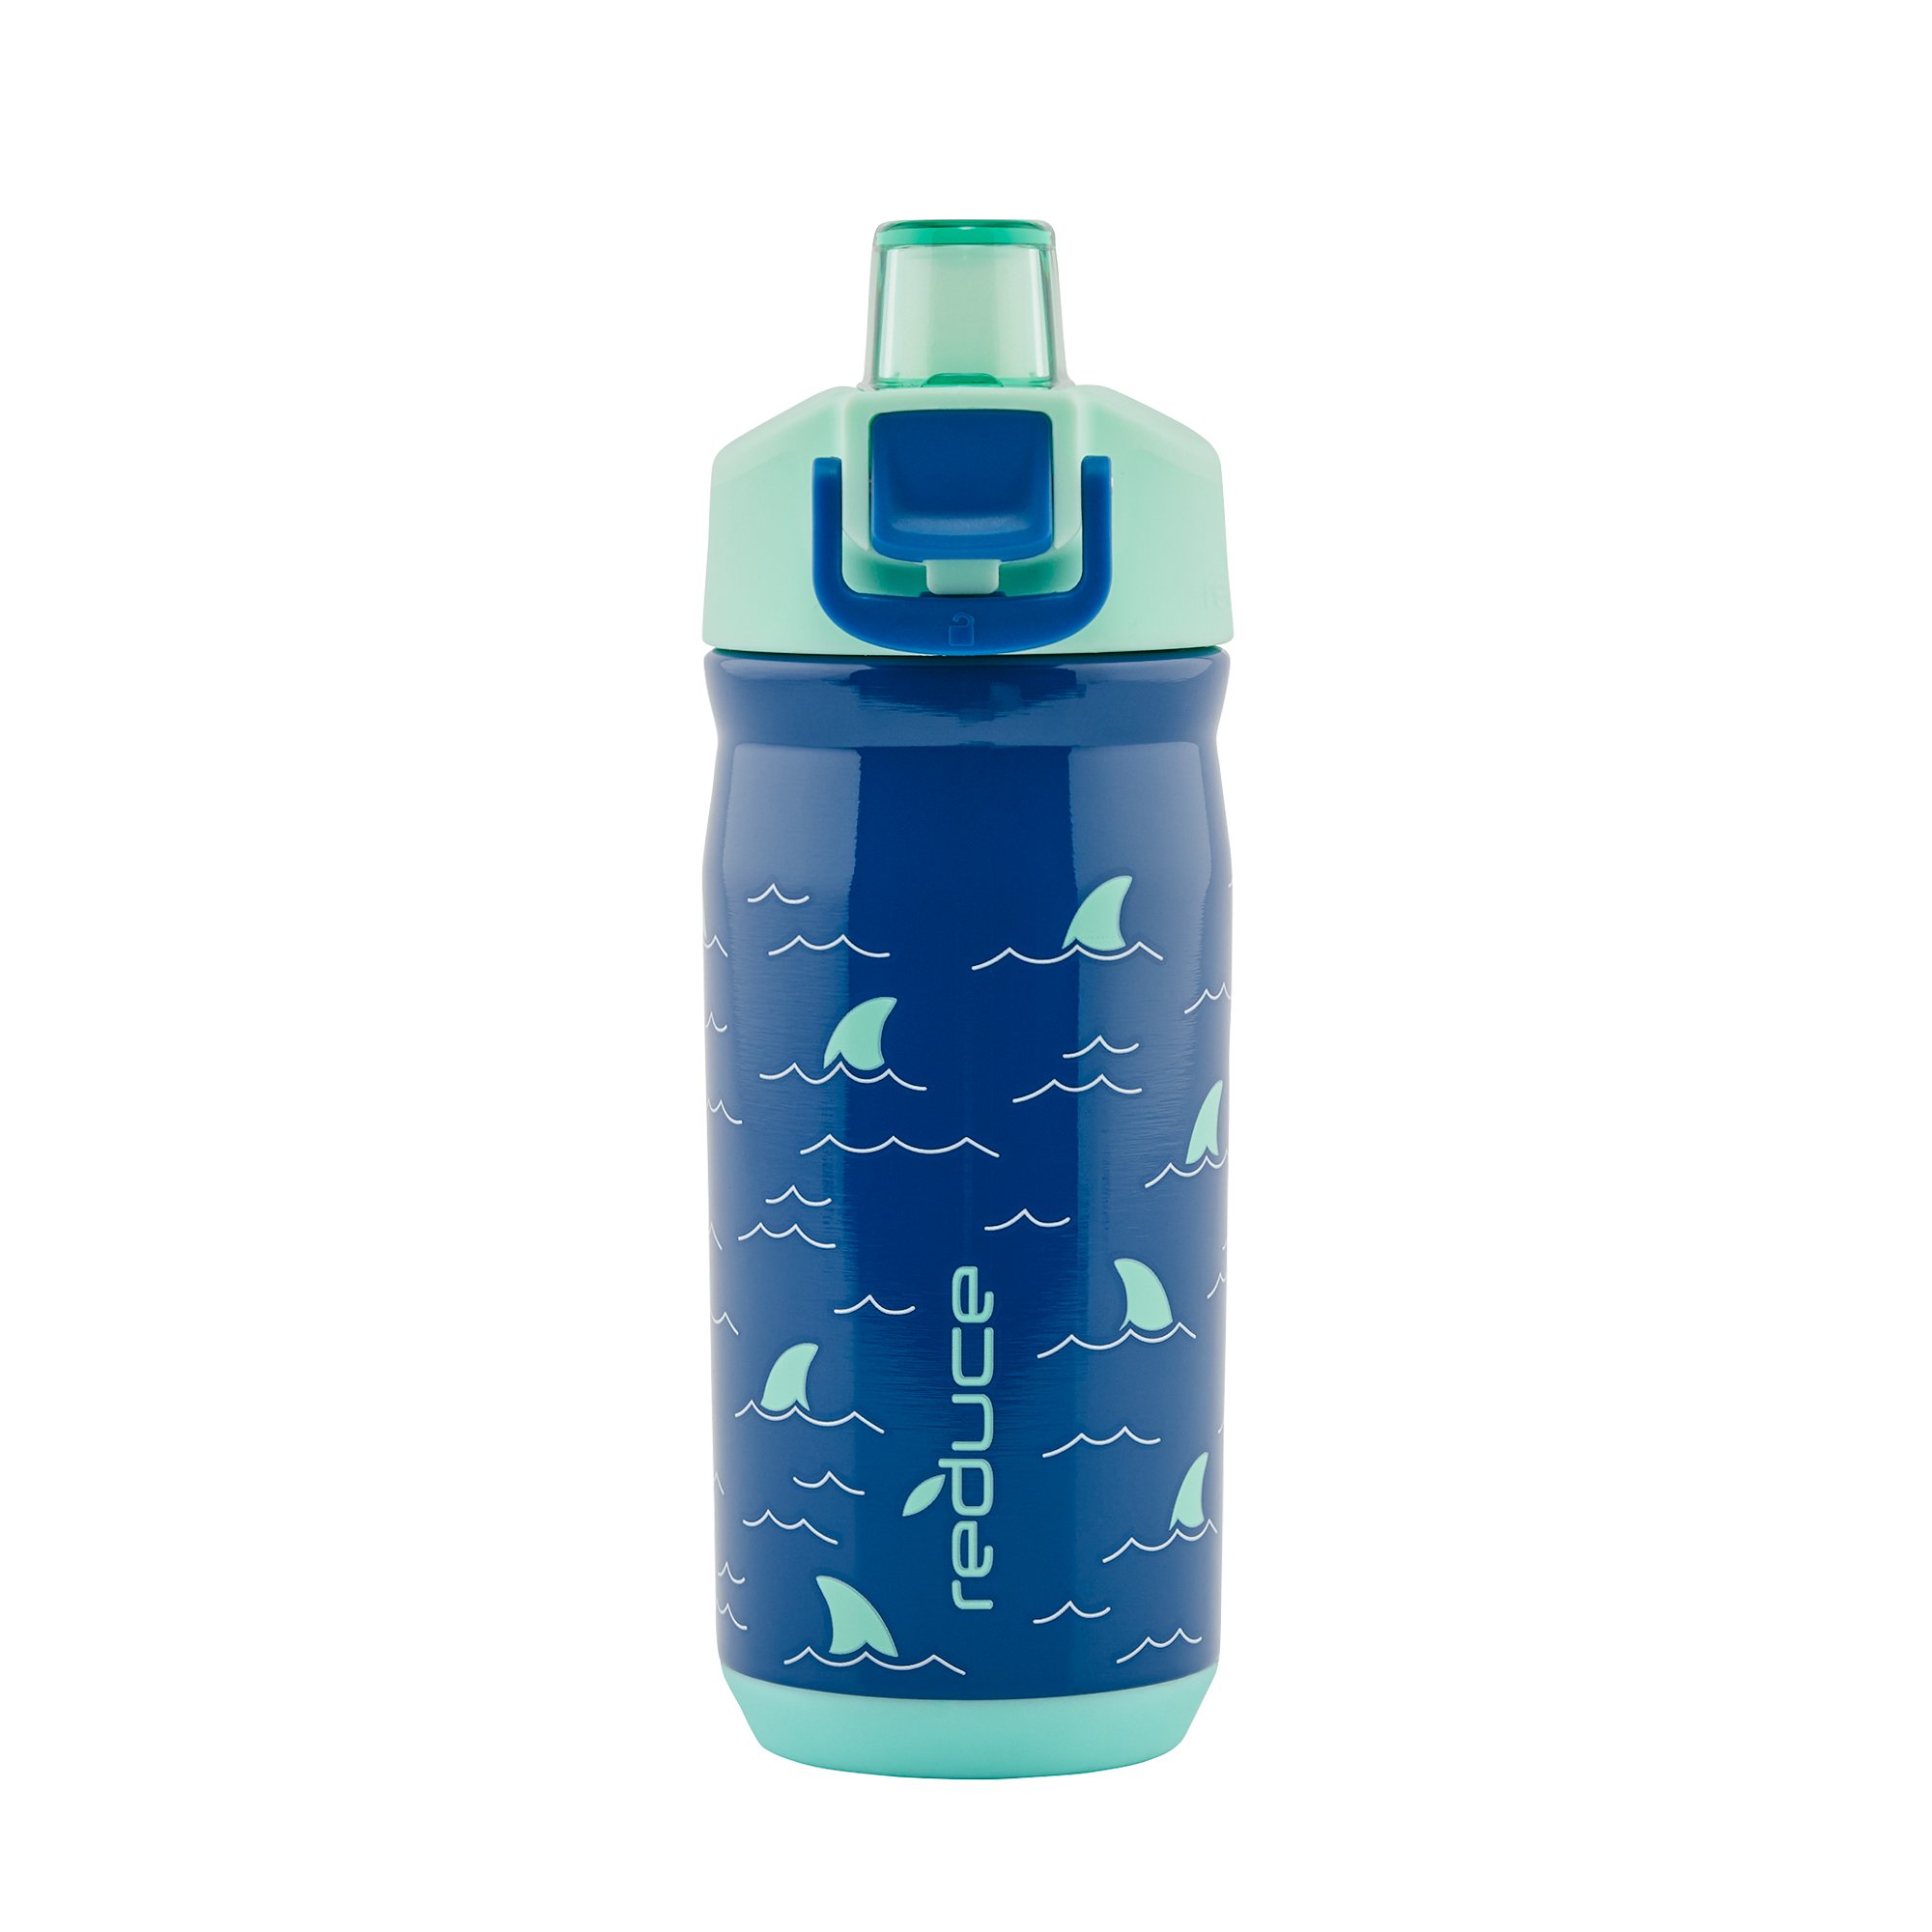 Reduce Stainless Steel Insulated Kids Frostee Water Bottle 13oz Bubble Gum  for sale online